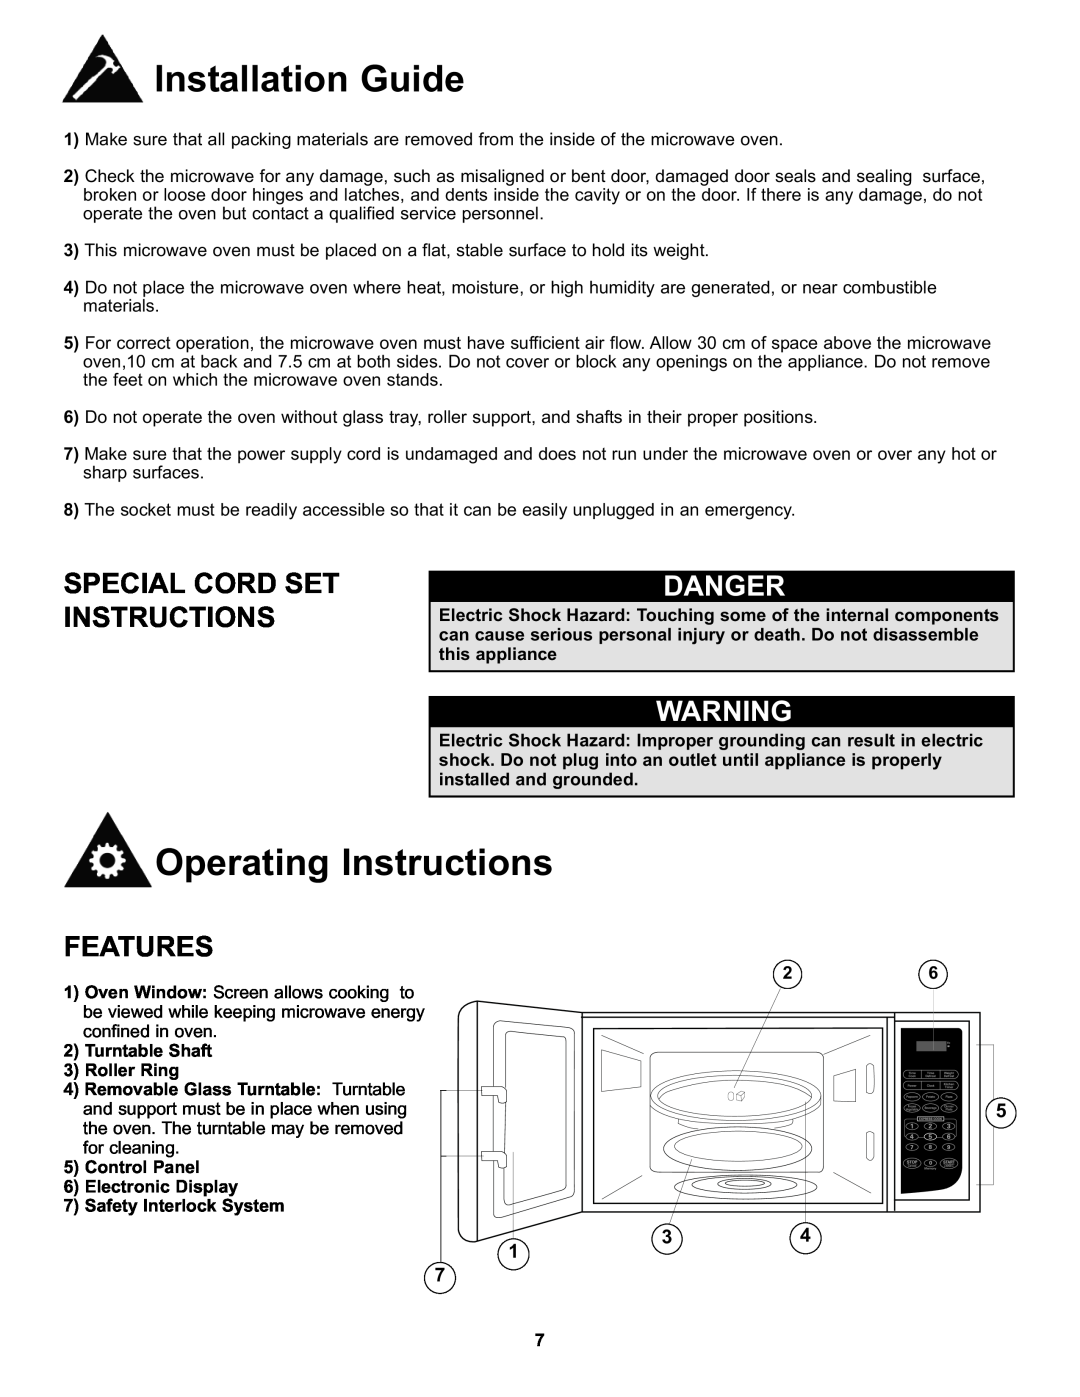 Danby DMW111KWDB manual Installation Guide, Operating Instructions, Special Cord Set Instructions, Danger, Features, 5 34 